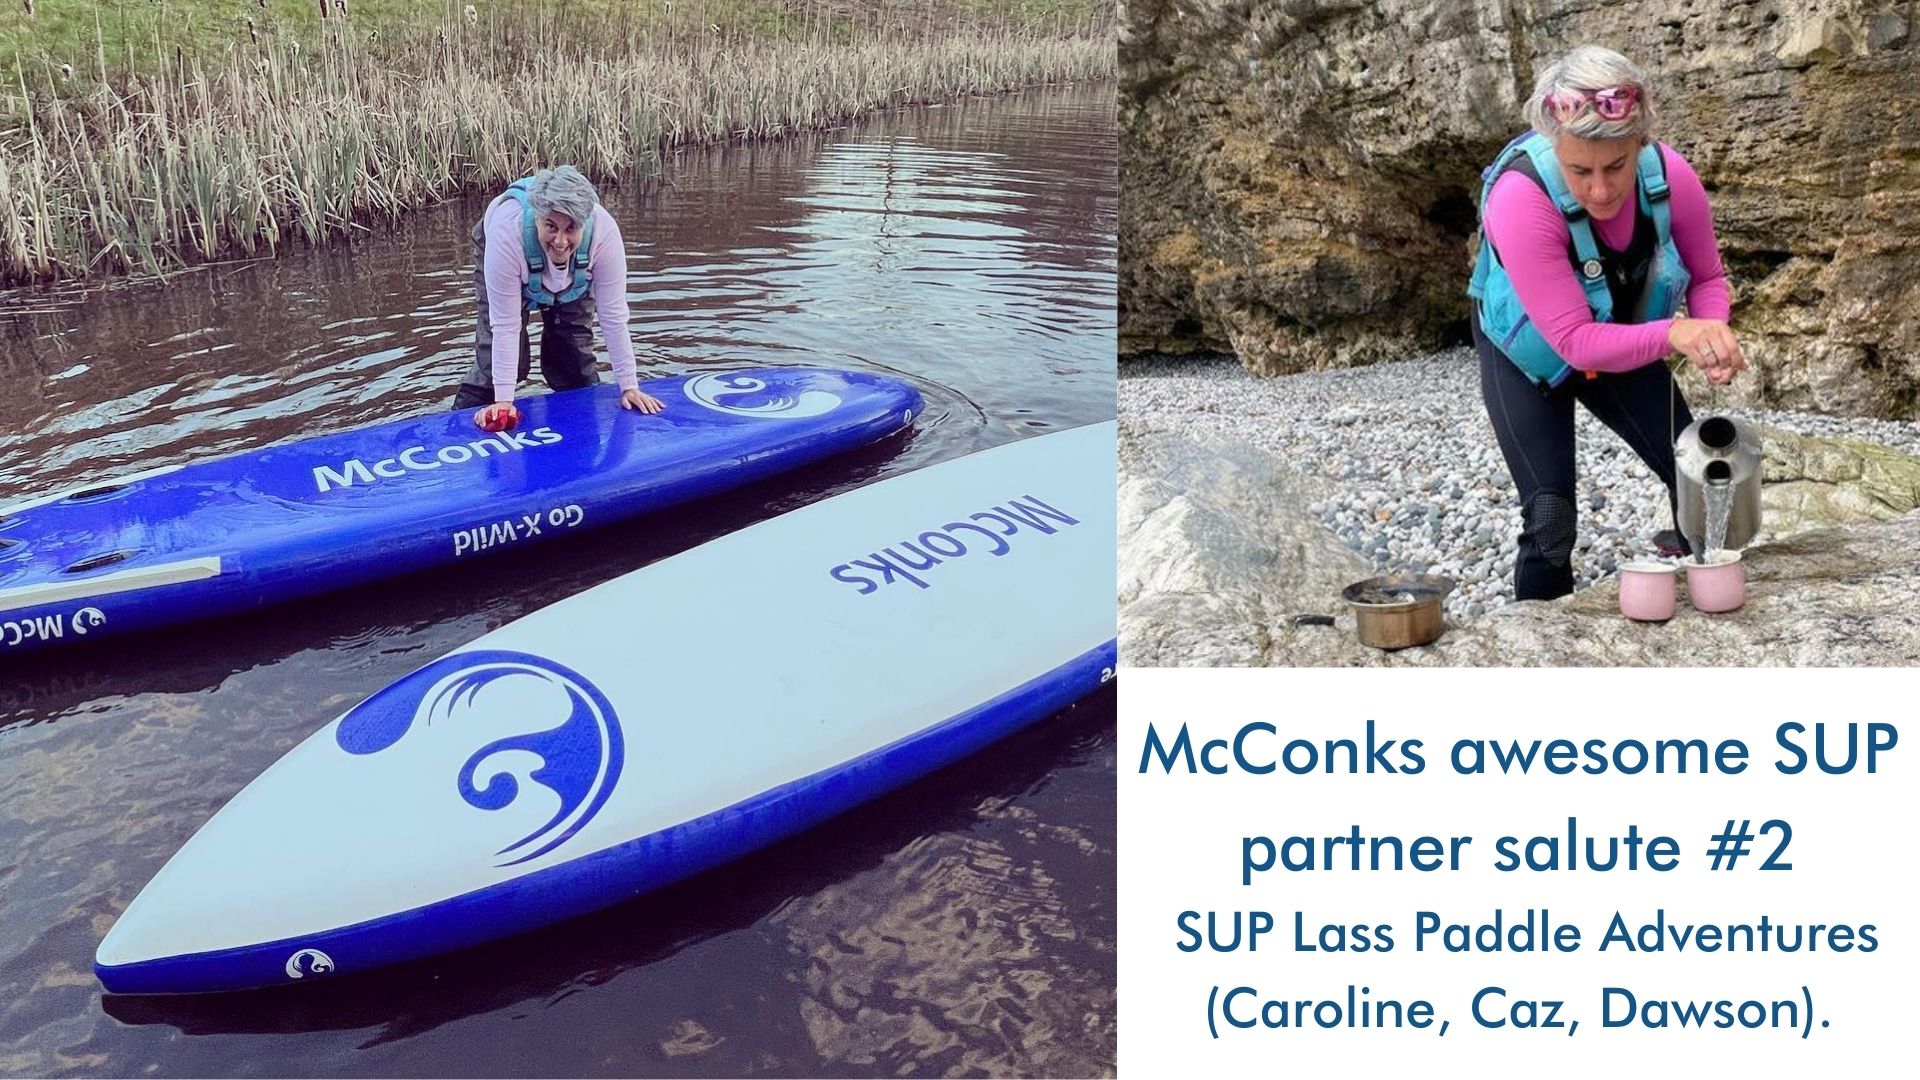 You are currently viewing McConks awesome SUP partner salute #2 SUP Lass Paddle Adventures (Caroline, Caz, Dawson).